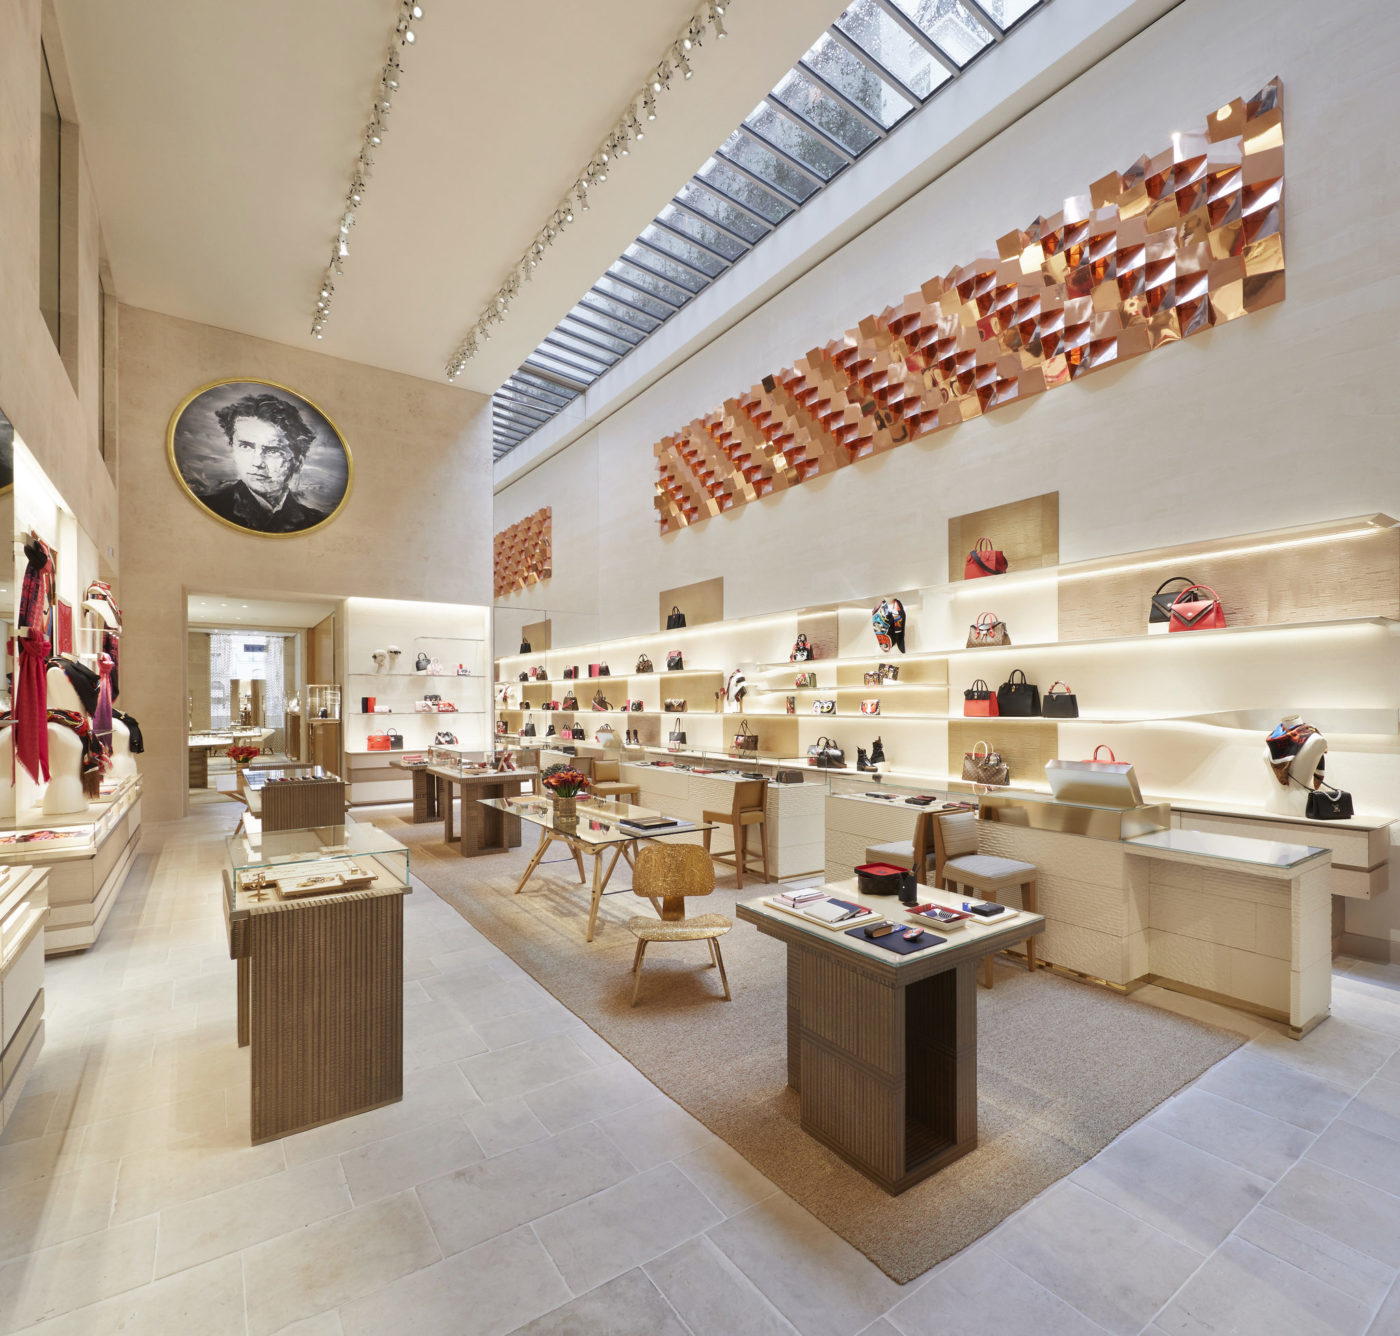 All 99+ Images how many louis vuitton stores are there Completed